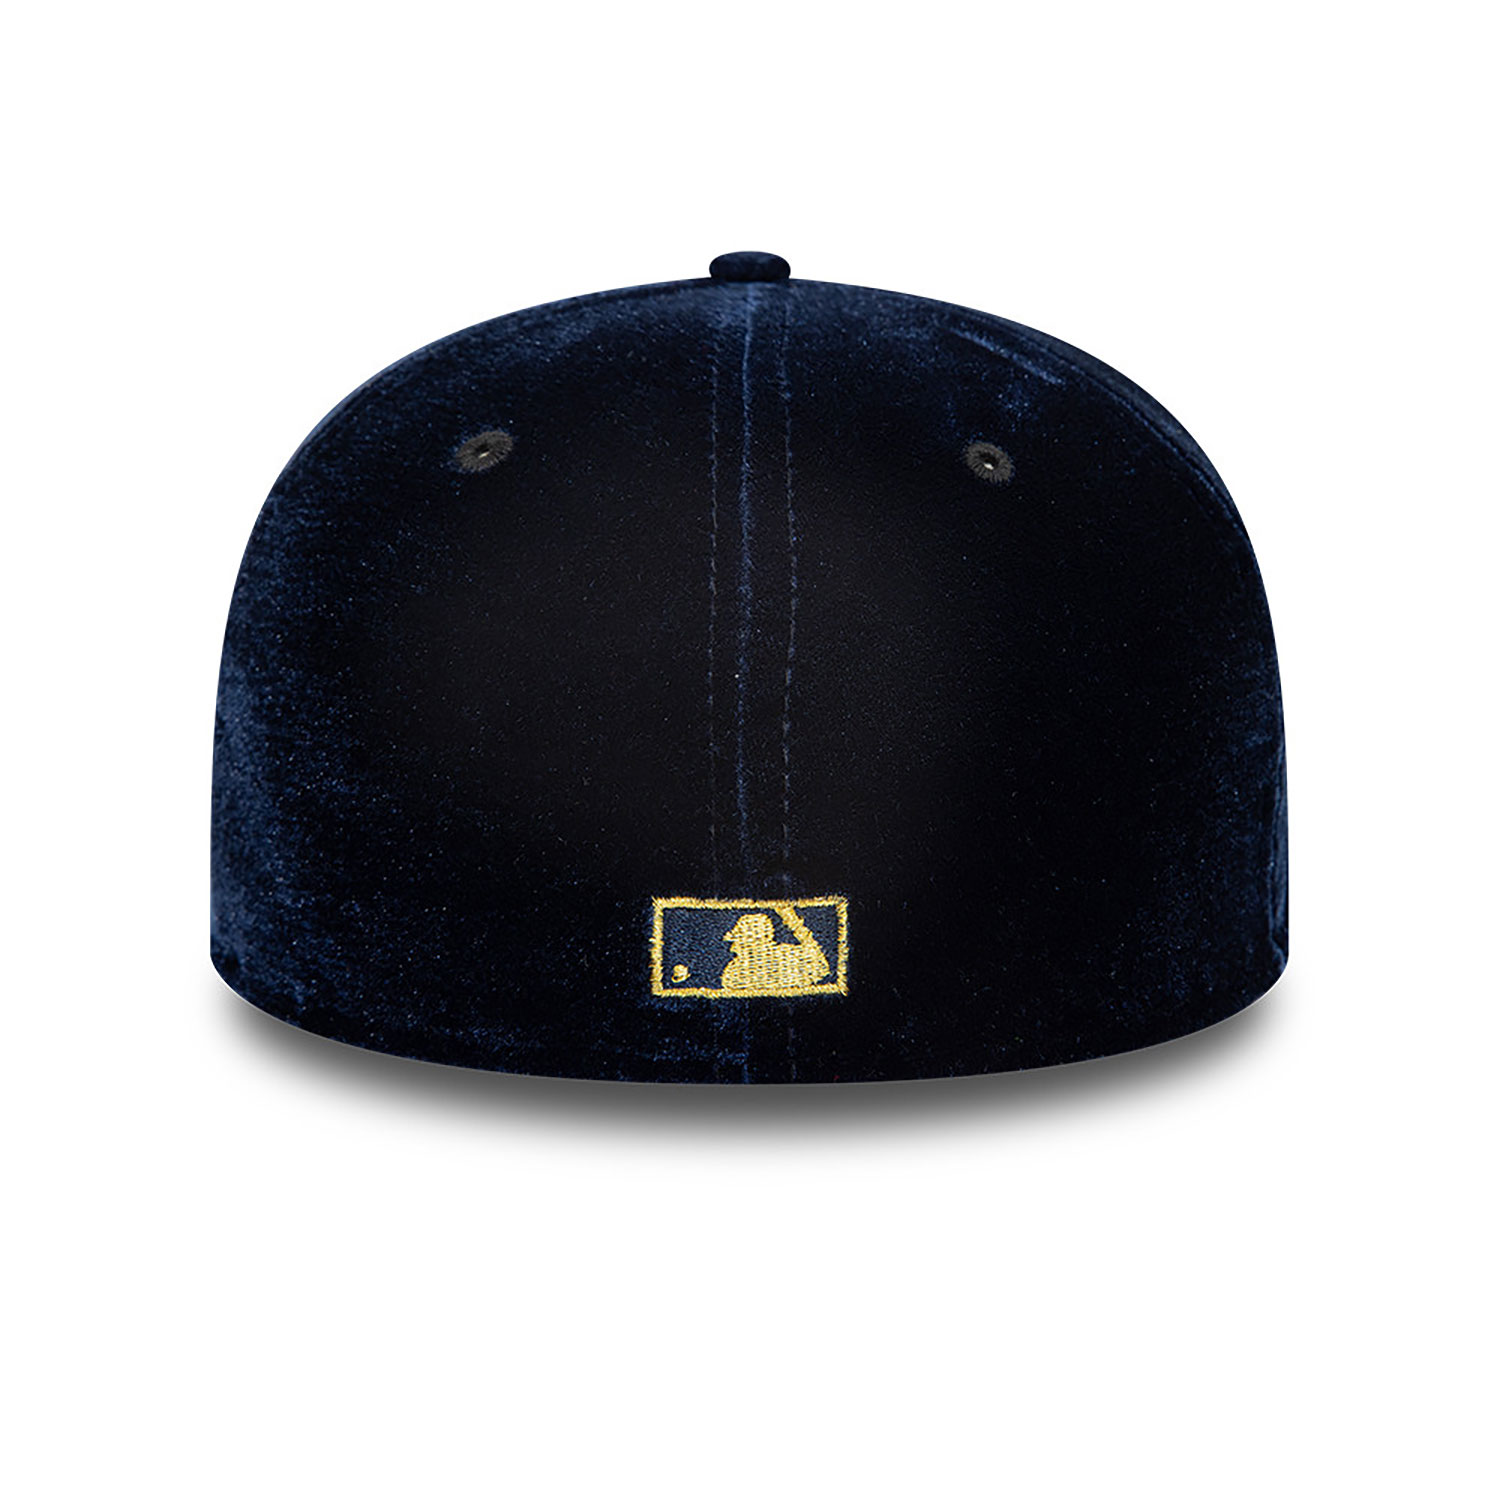 Oakland Athletics Midnight Velour Navy 59FIFTY Fitted Cap